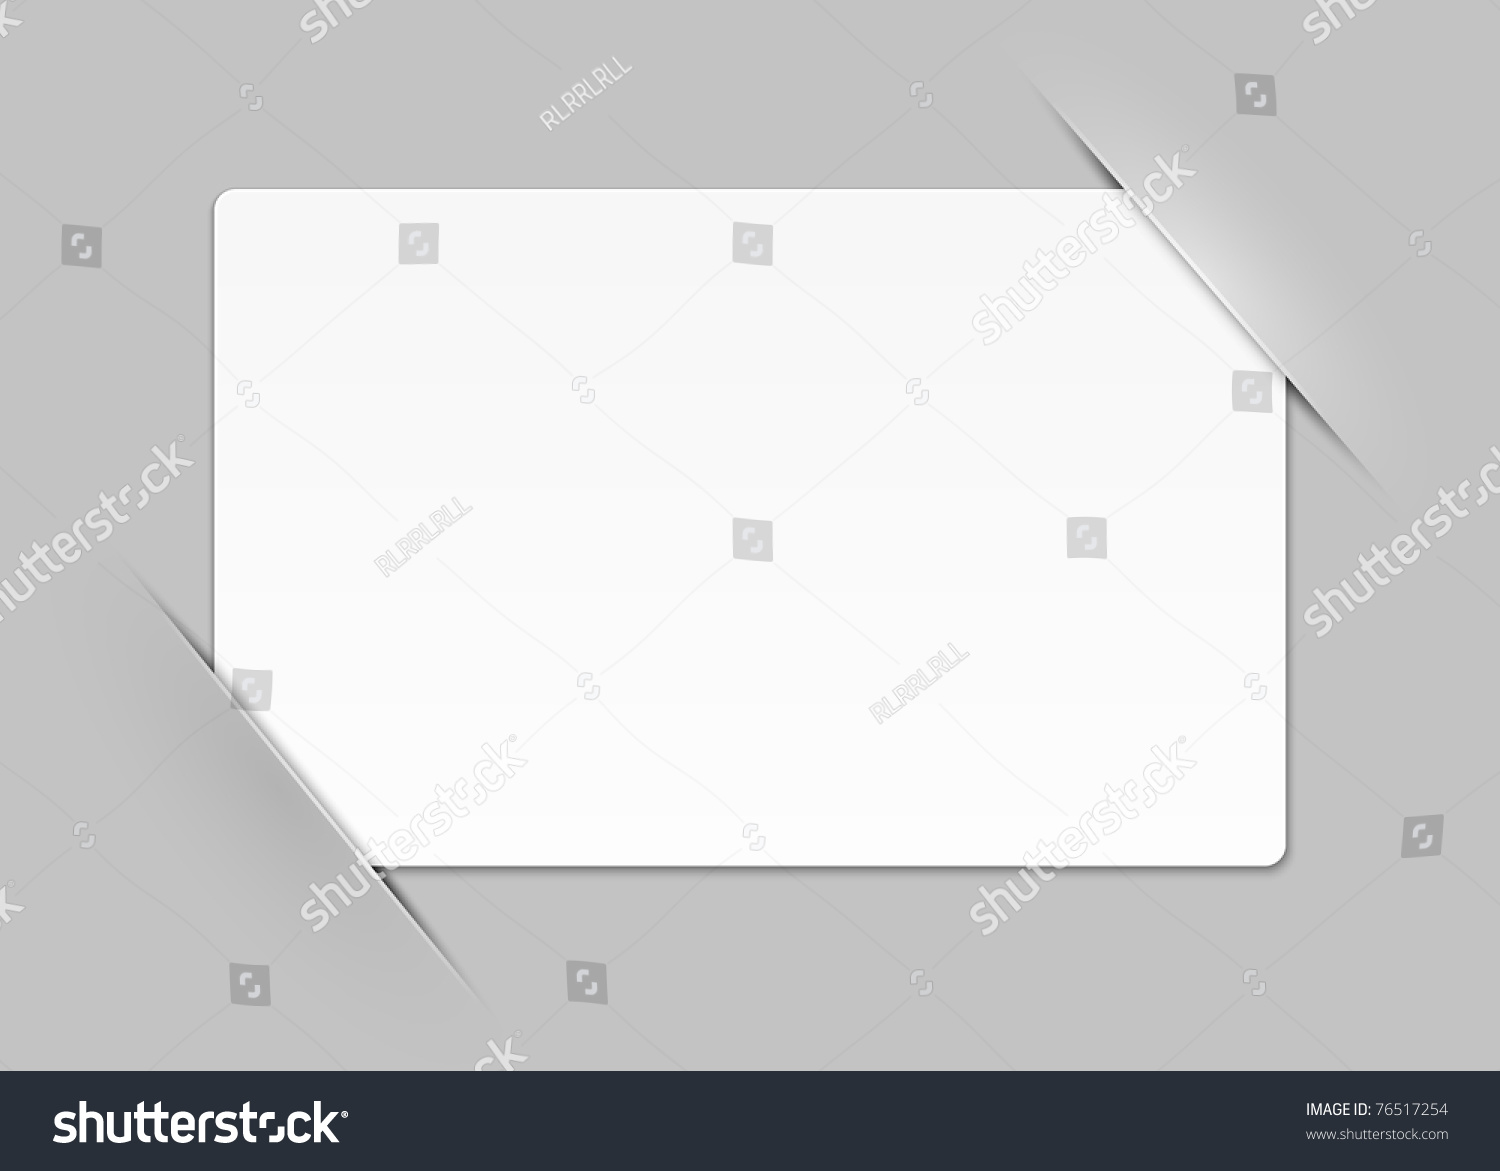 SVG of Composite empty page with places for photo, eps10 vector background svg